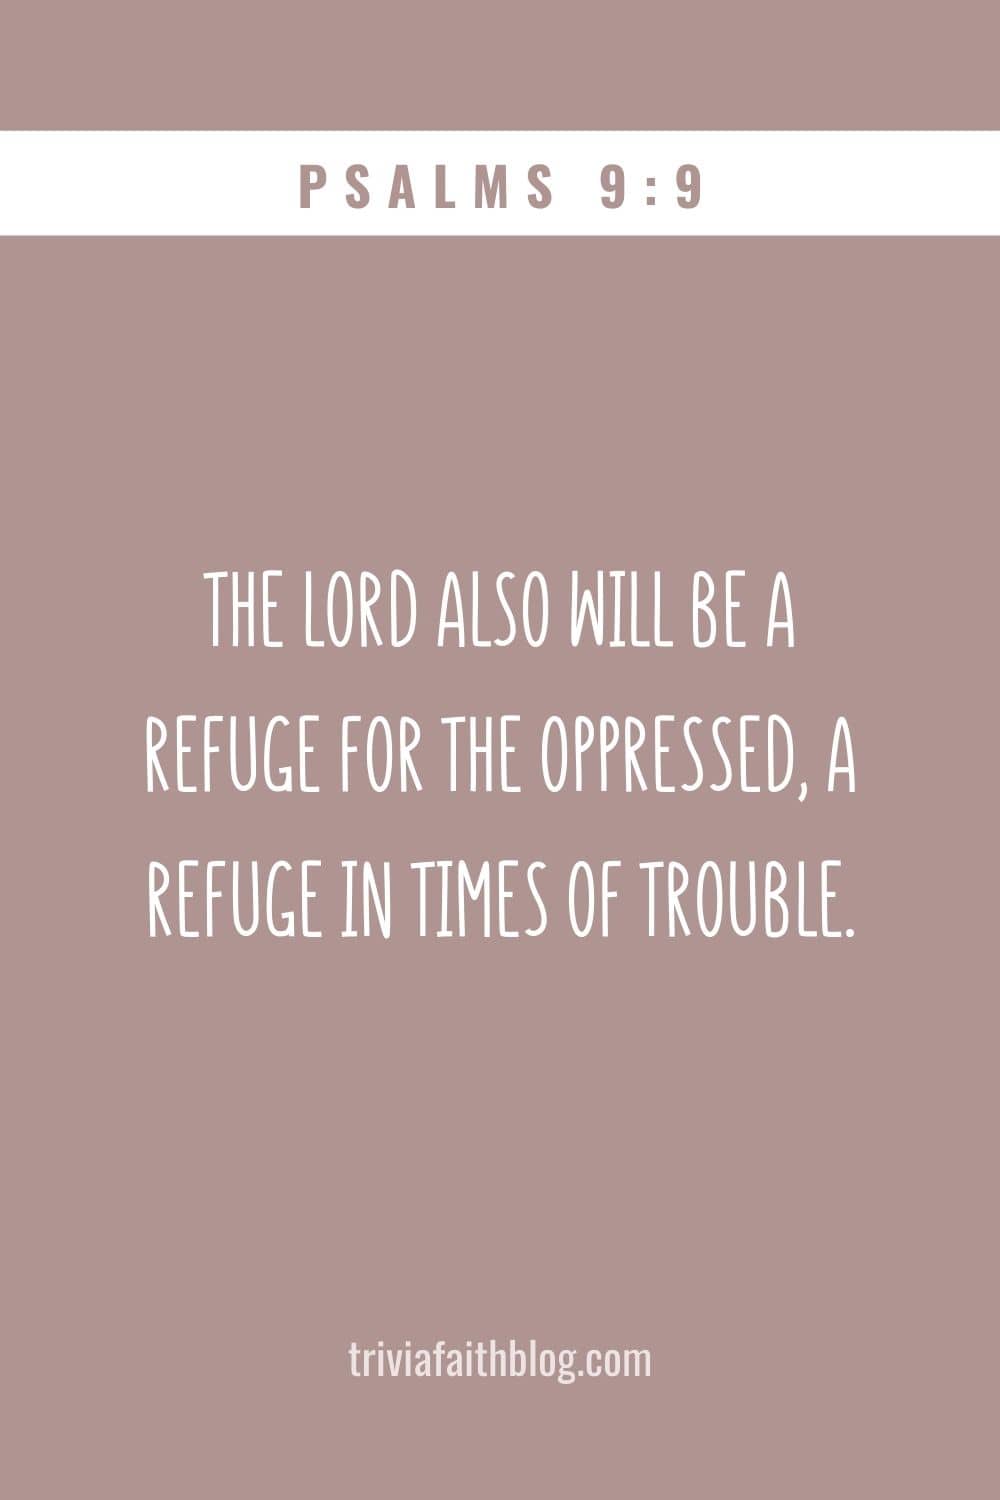 The LORD also will be a refuge for the oppressed, a refuge in times of trouble